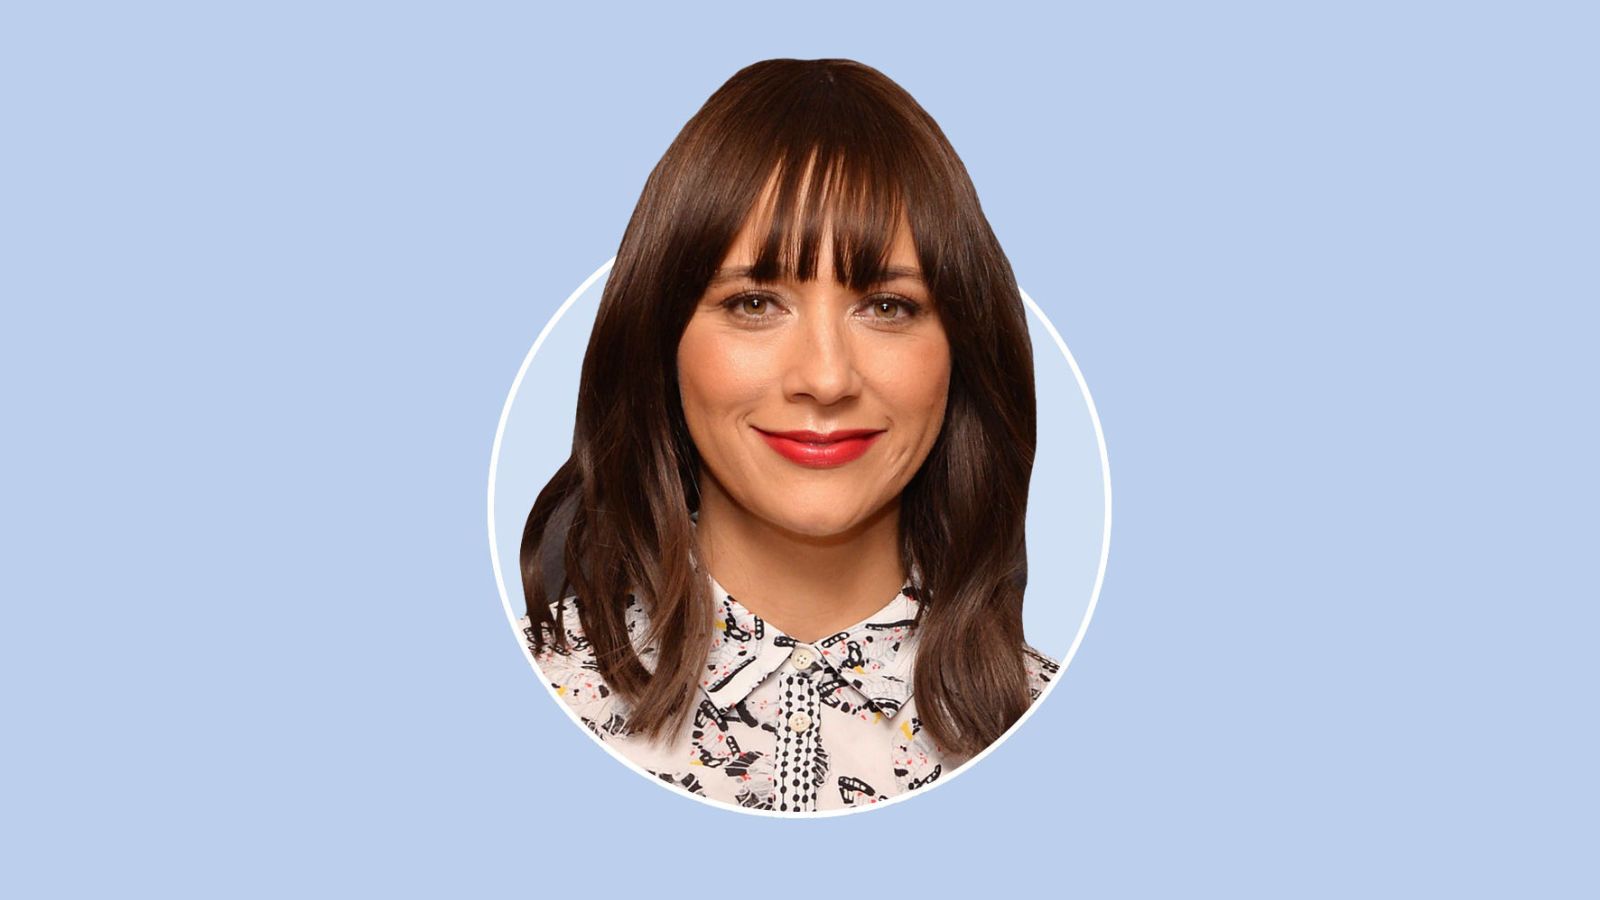 Sex, Porn, and Tech Interview with Rashida Jones, Director of Hot Girls Wanted Turned On Marie Claire image pic